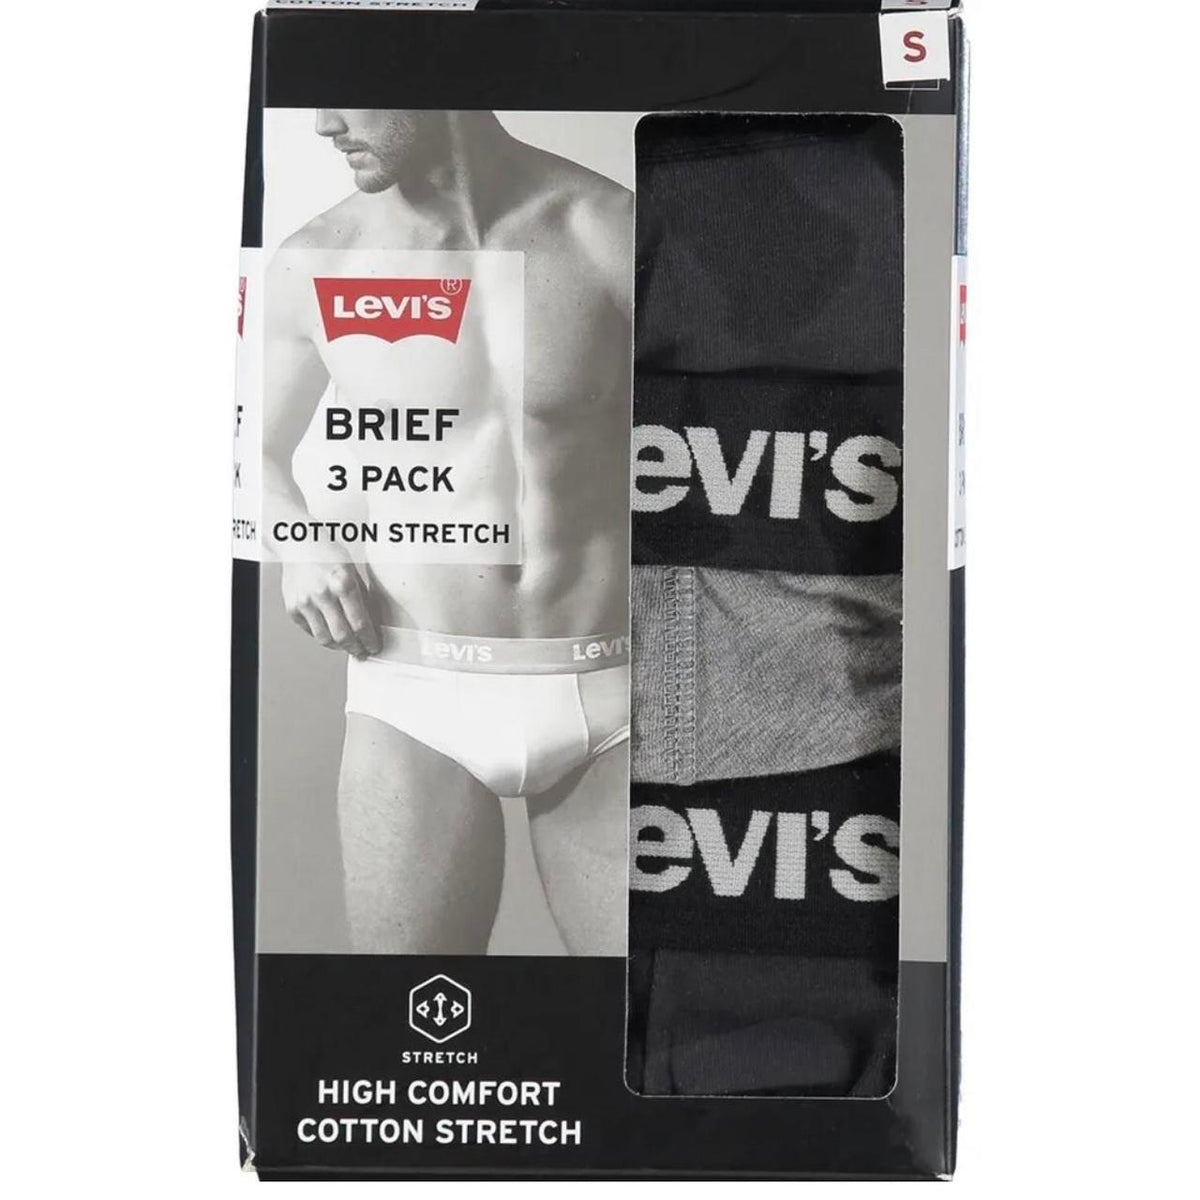 Levi's 3 -Pack Solid Basic Men's Briefs Navy/Grey Double Layered - Small